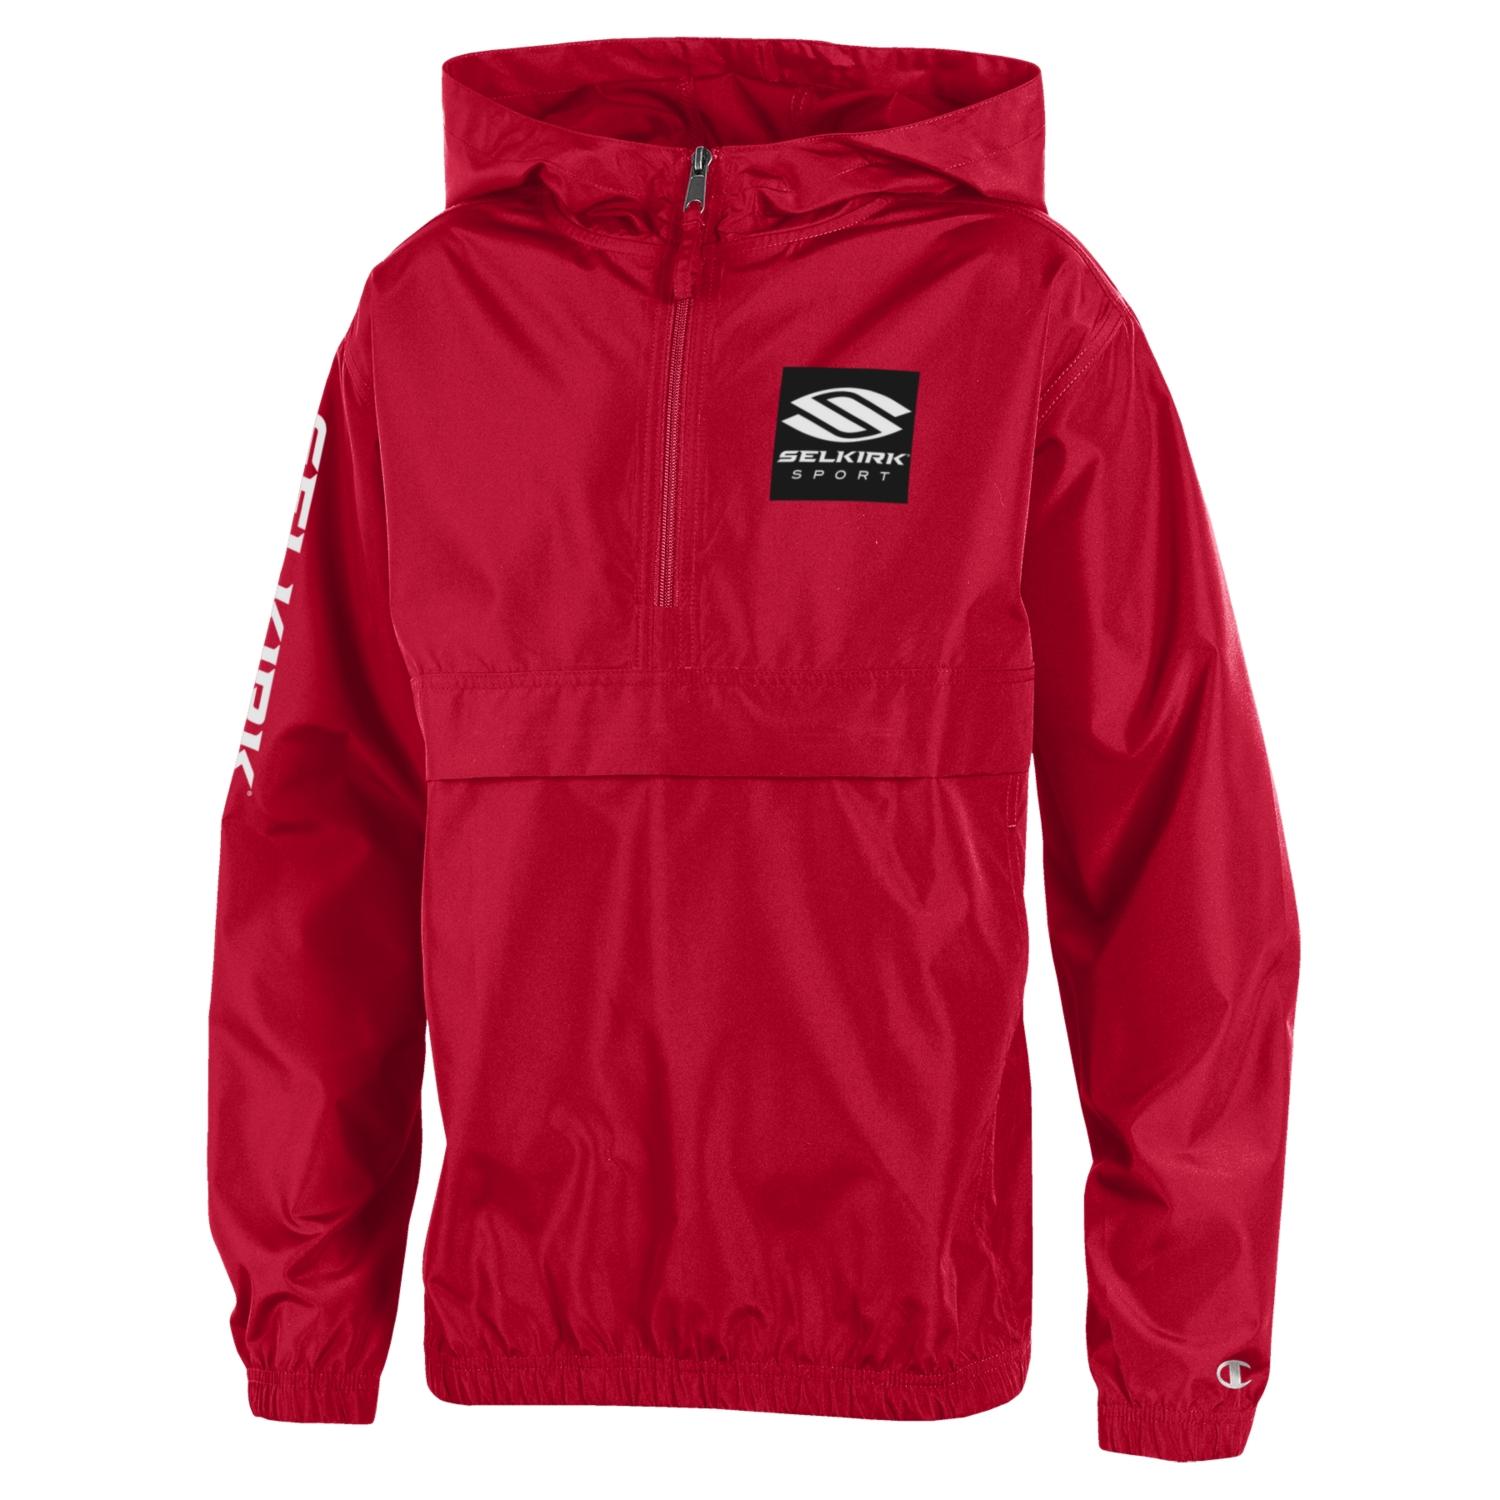 Selkirk x Champion Youth Packable Jacket | Selkirk Sport - We Are ...